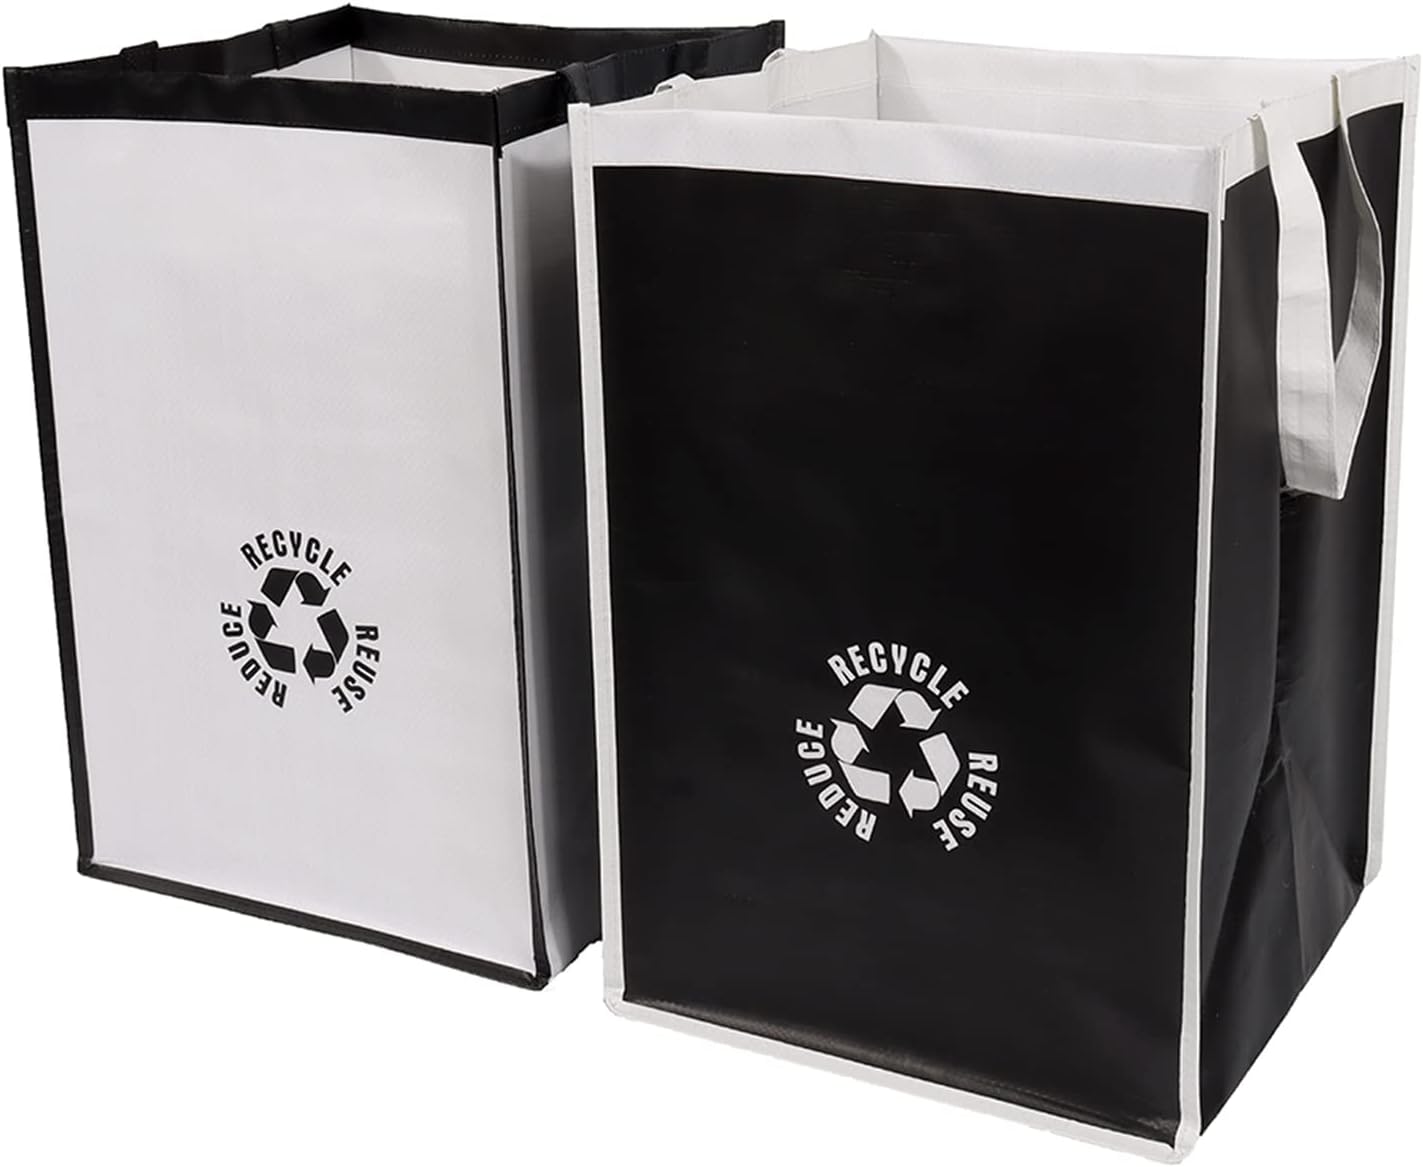 lily queen recycle waste bag review